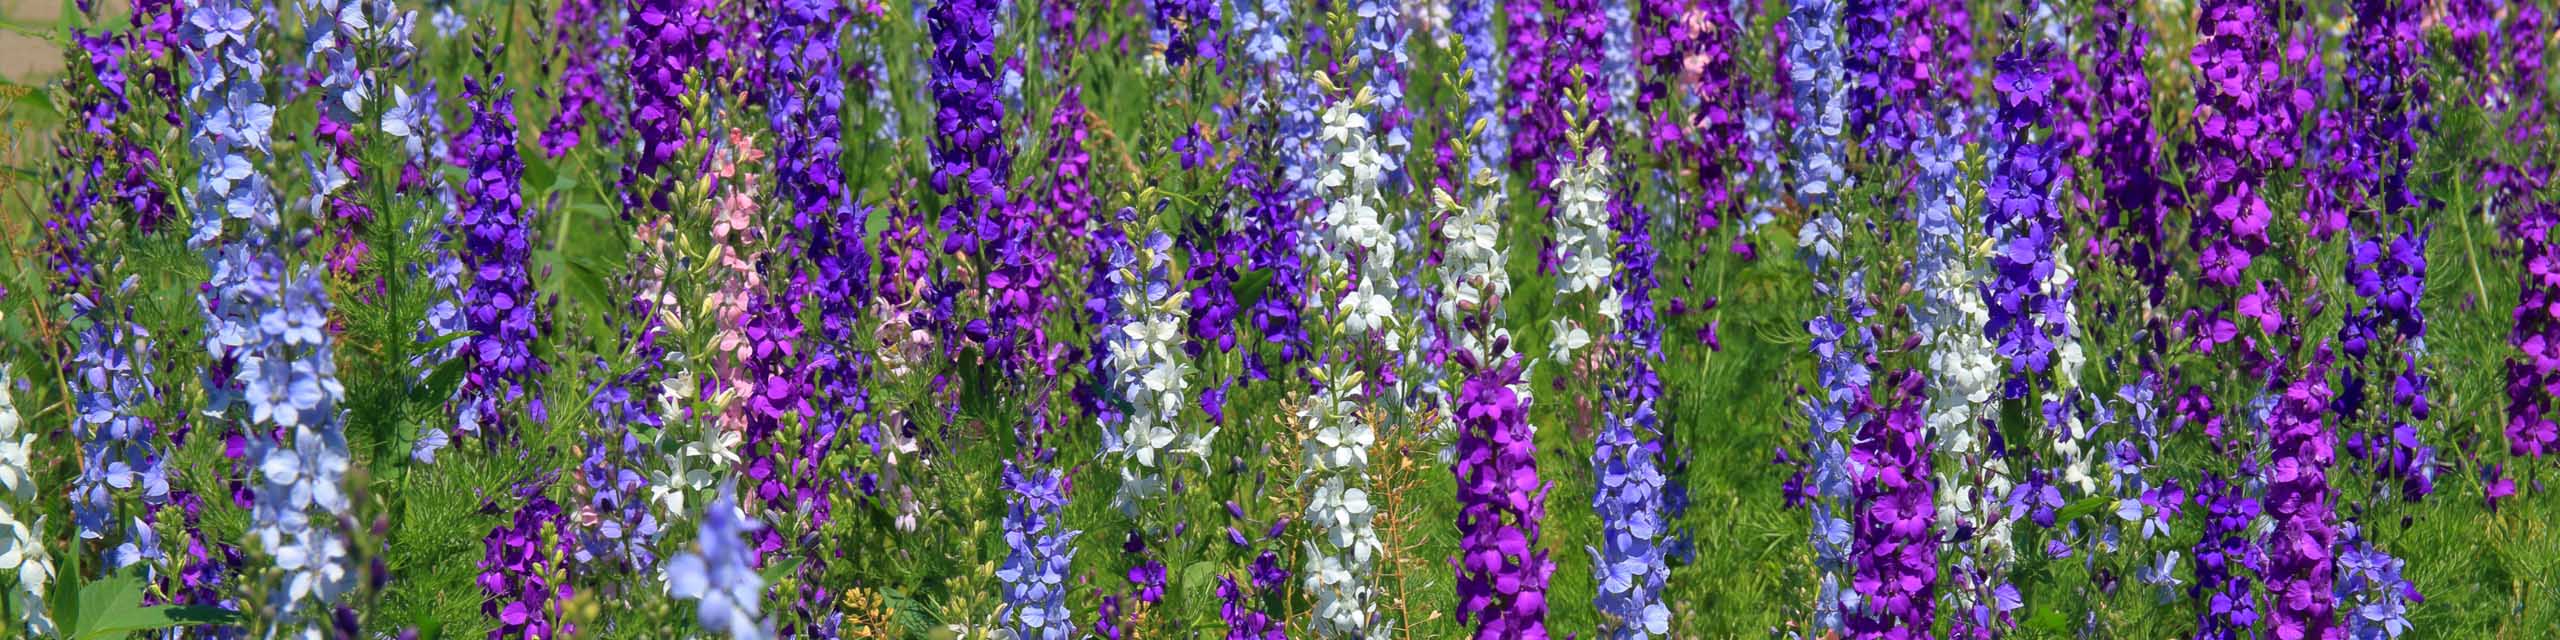 Meadow full of pink, blue, purple, and white delphinium flowers.